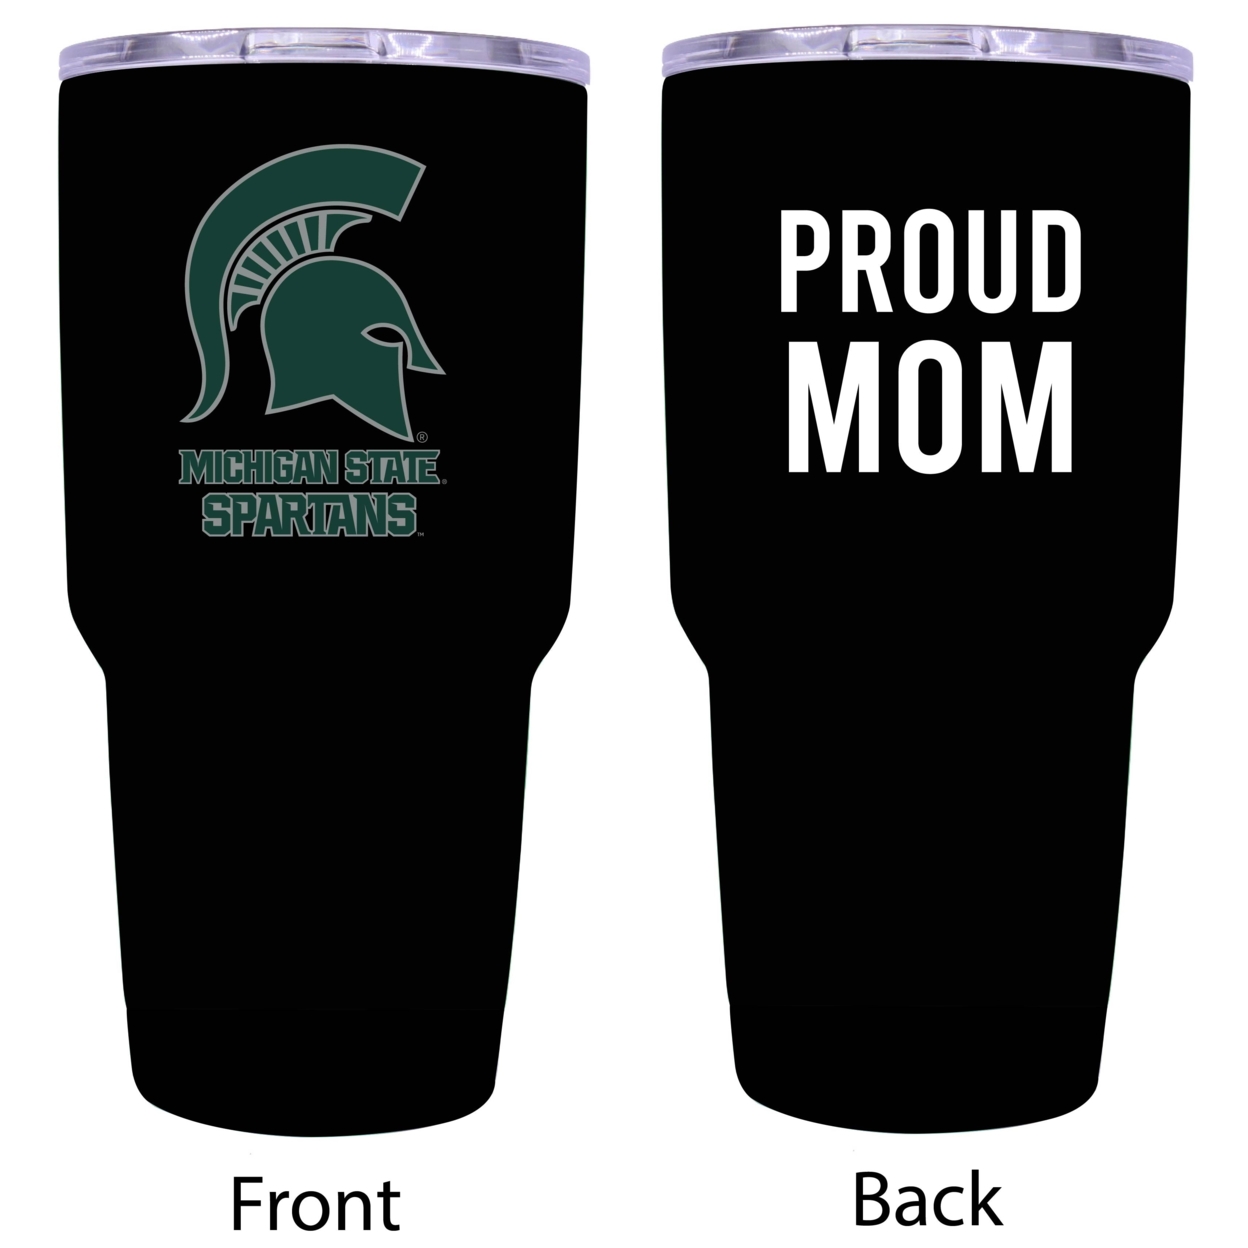 Michigan State Spartans Proud Mom 24 Oz Insulated Stainless Steel Tumbler